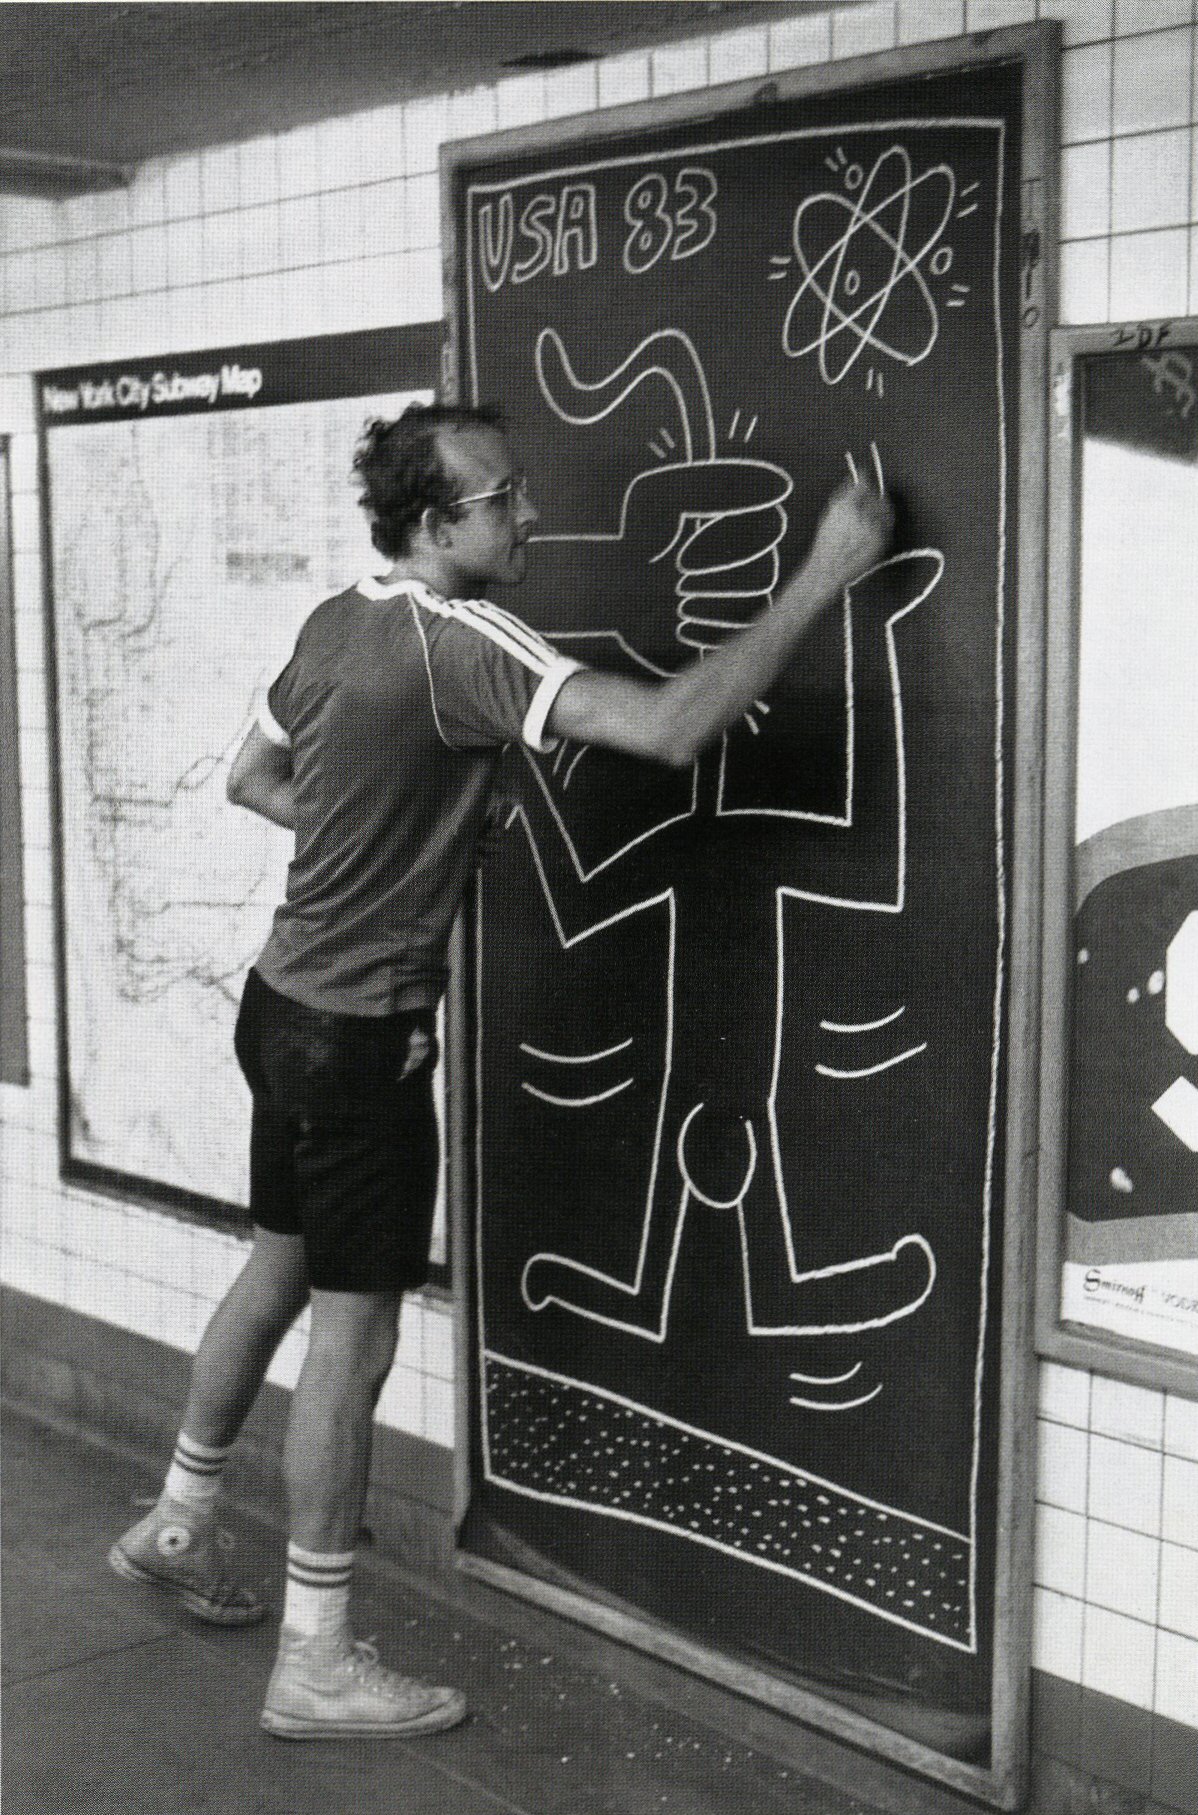 Haring drawing in the New York City subway system. (photo courtesy of the Keith Haring Foundation)